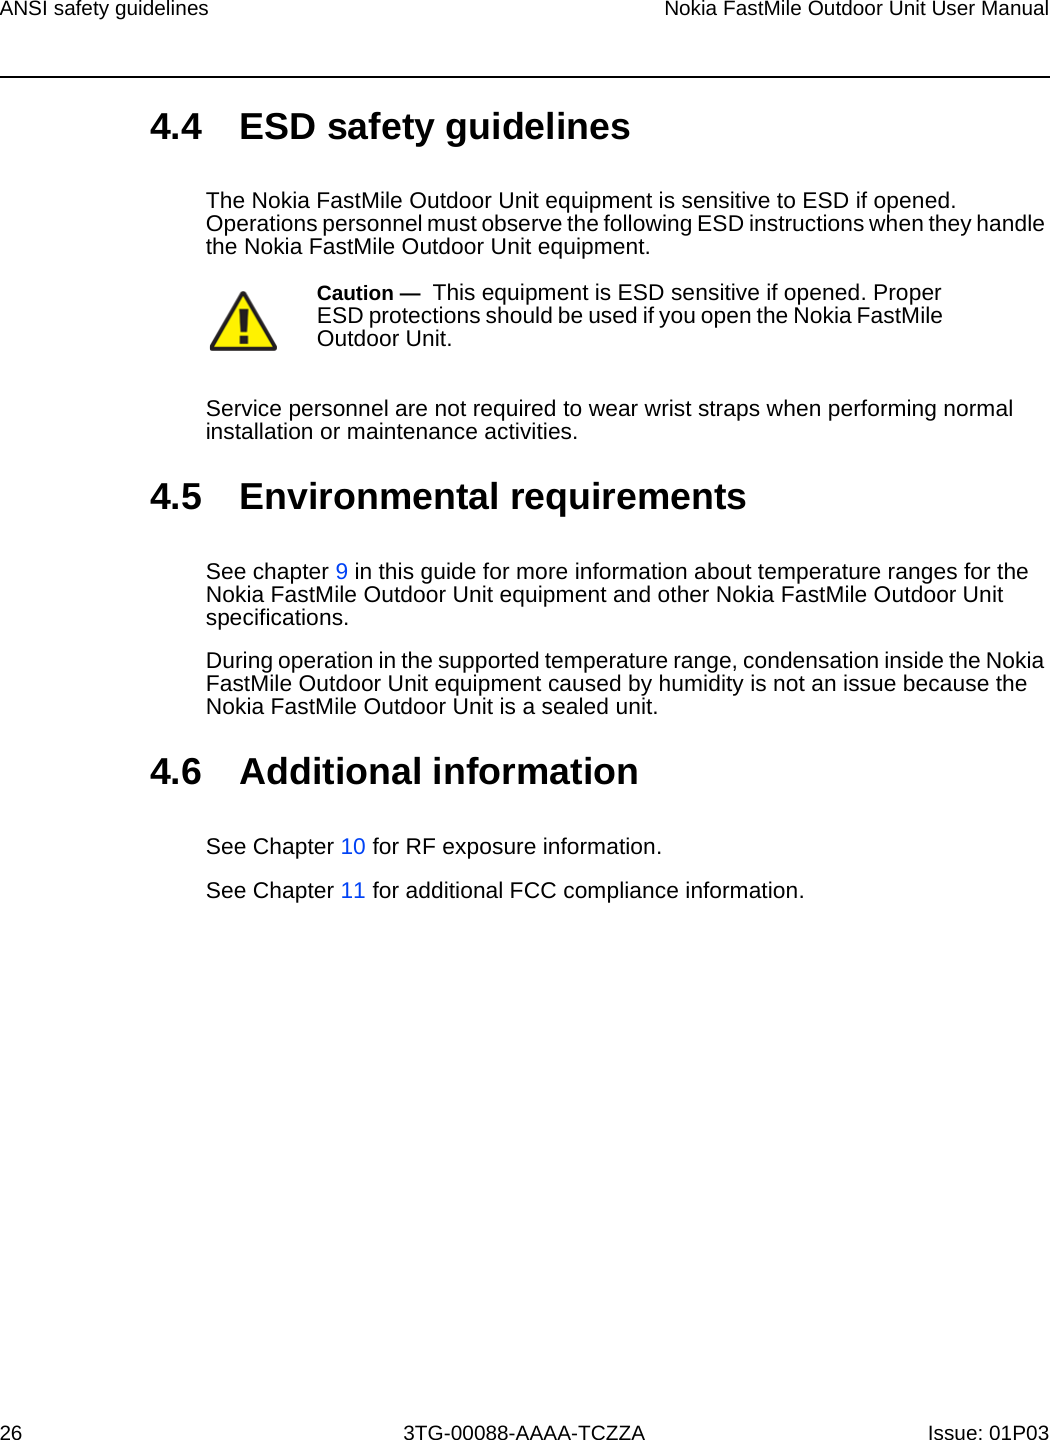 Page 24 of Nokia Bell 34003800FM20 FastMile Compact User Manual Nokia FastMile Outdoor Unit